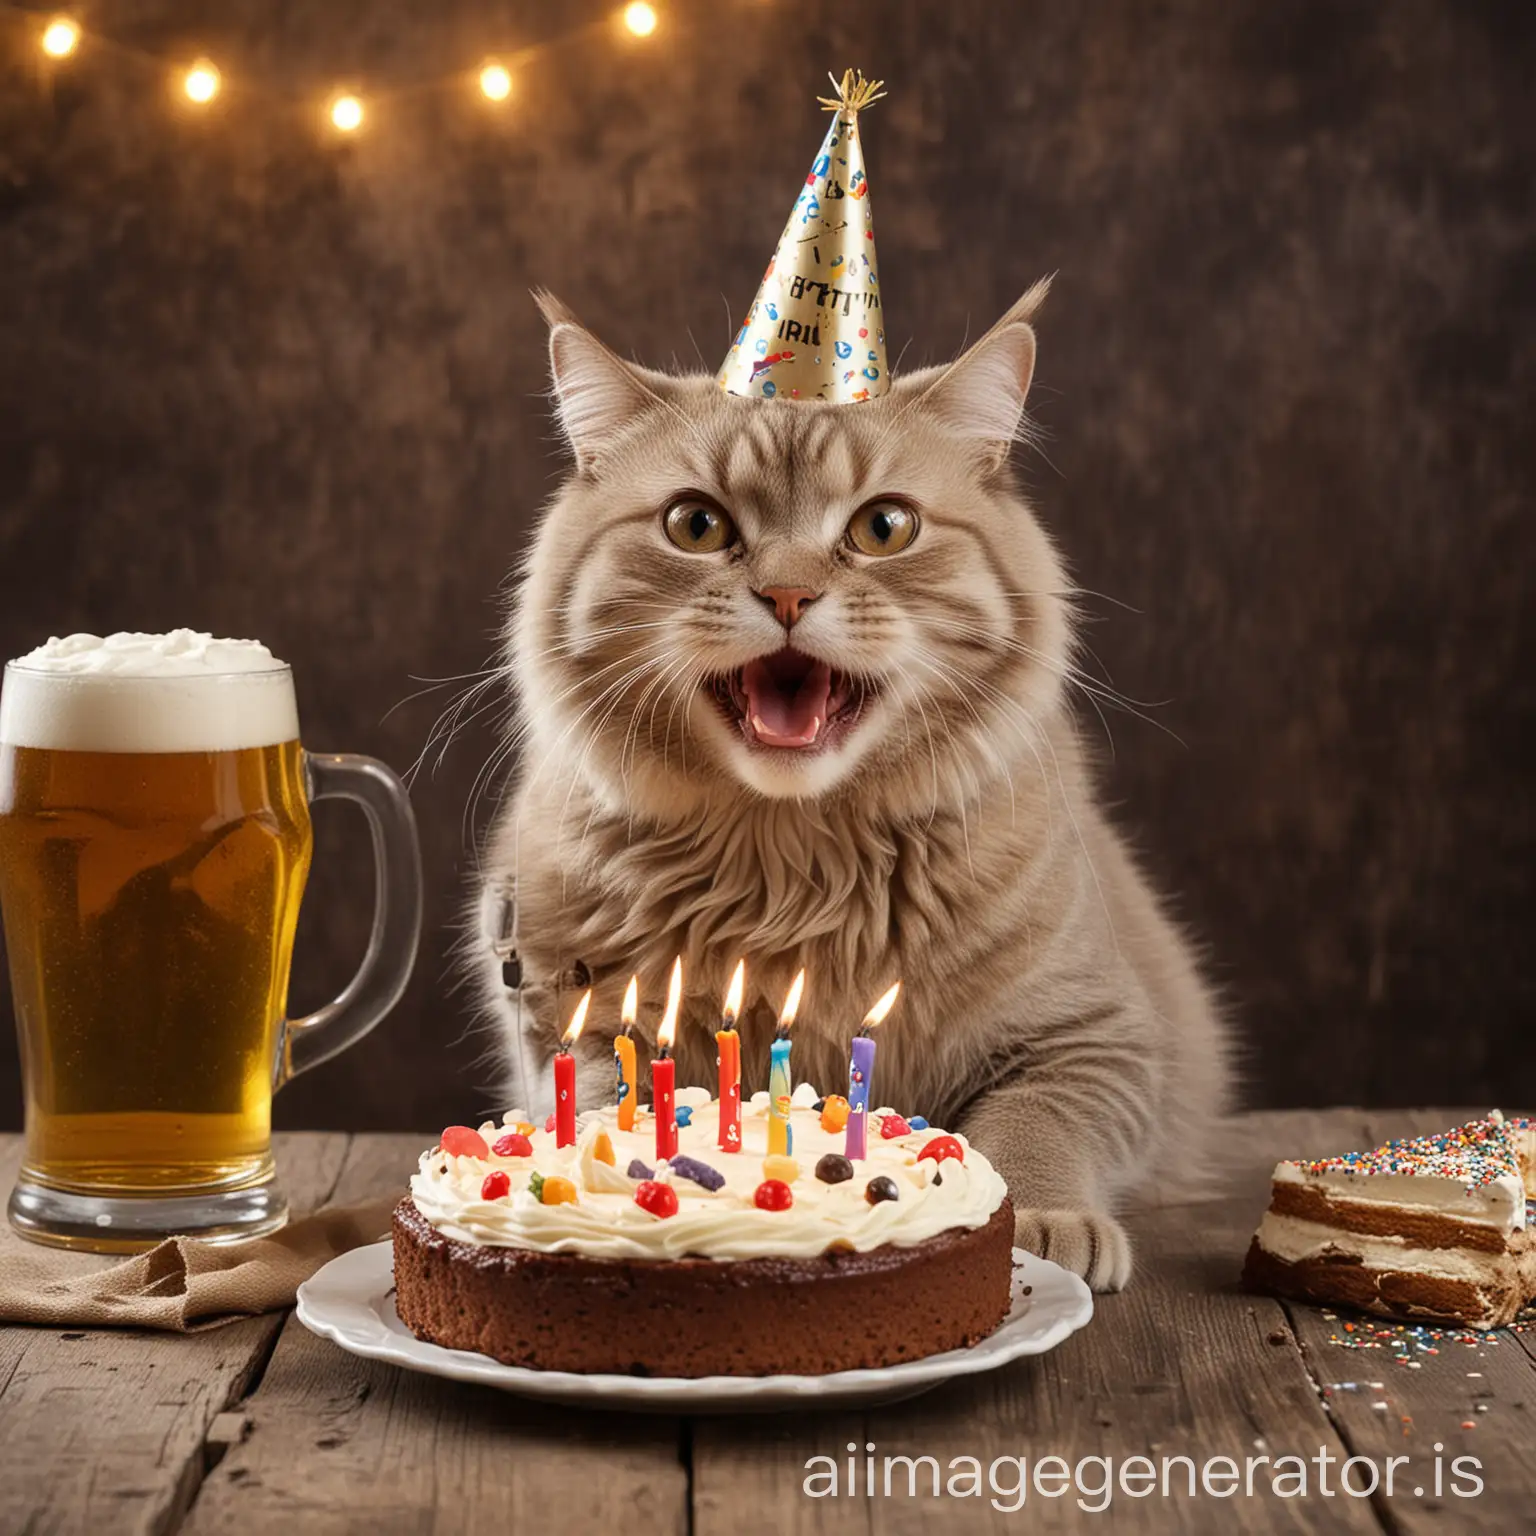 Happy cat wishing birthday with cake and beer